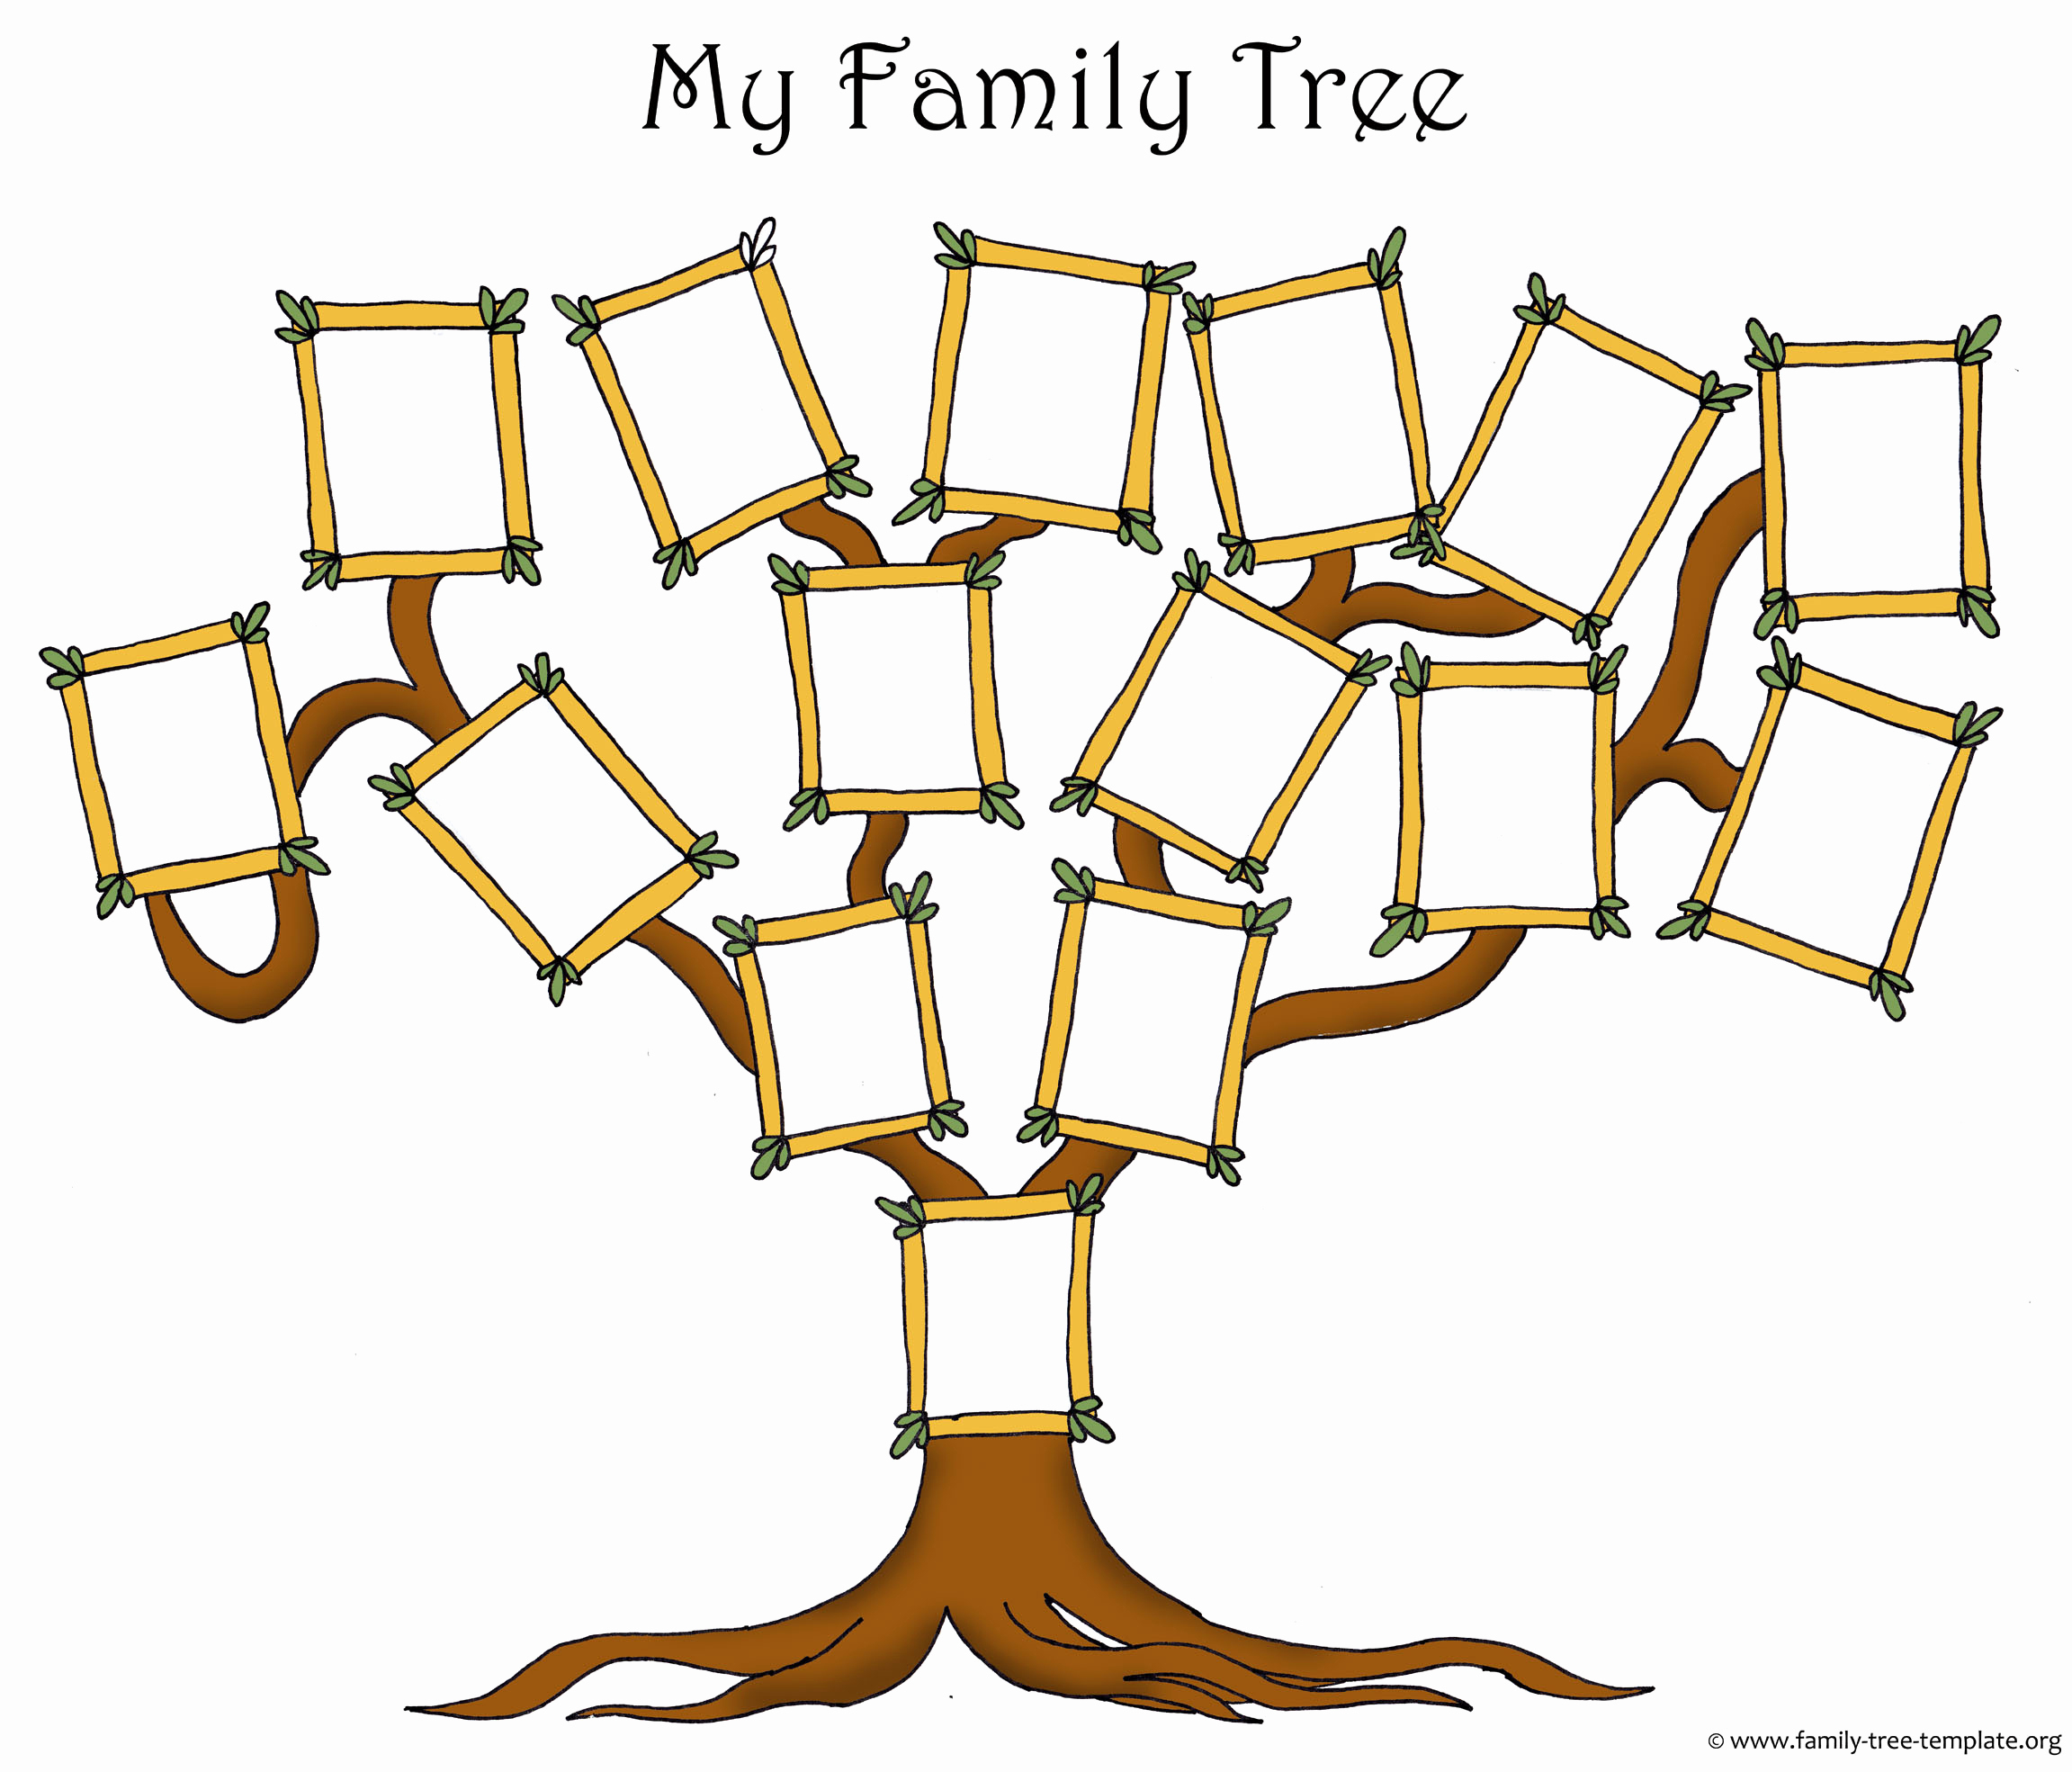 30 Fill In Family Tree | Tate Publishing News Intended For Fill In The Blank Family Tree Template